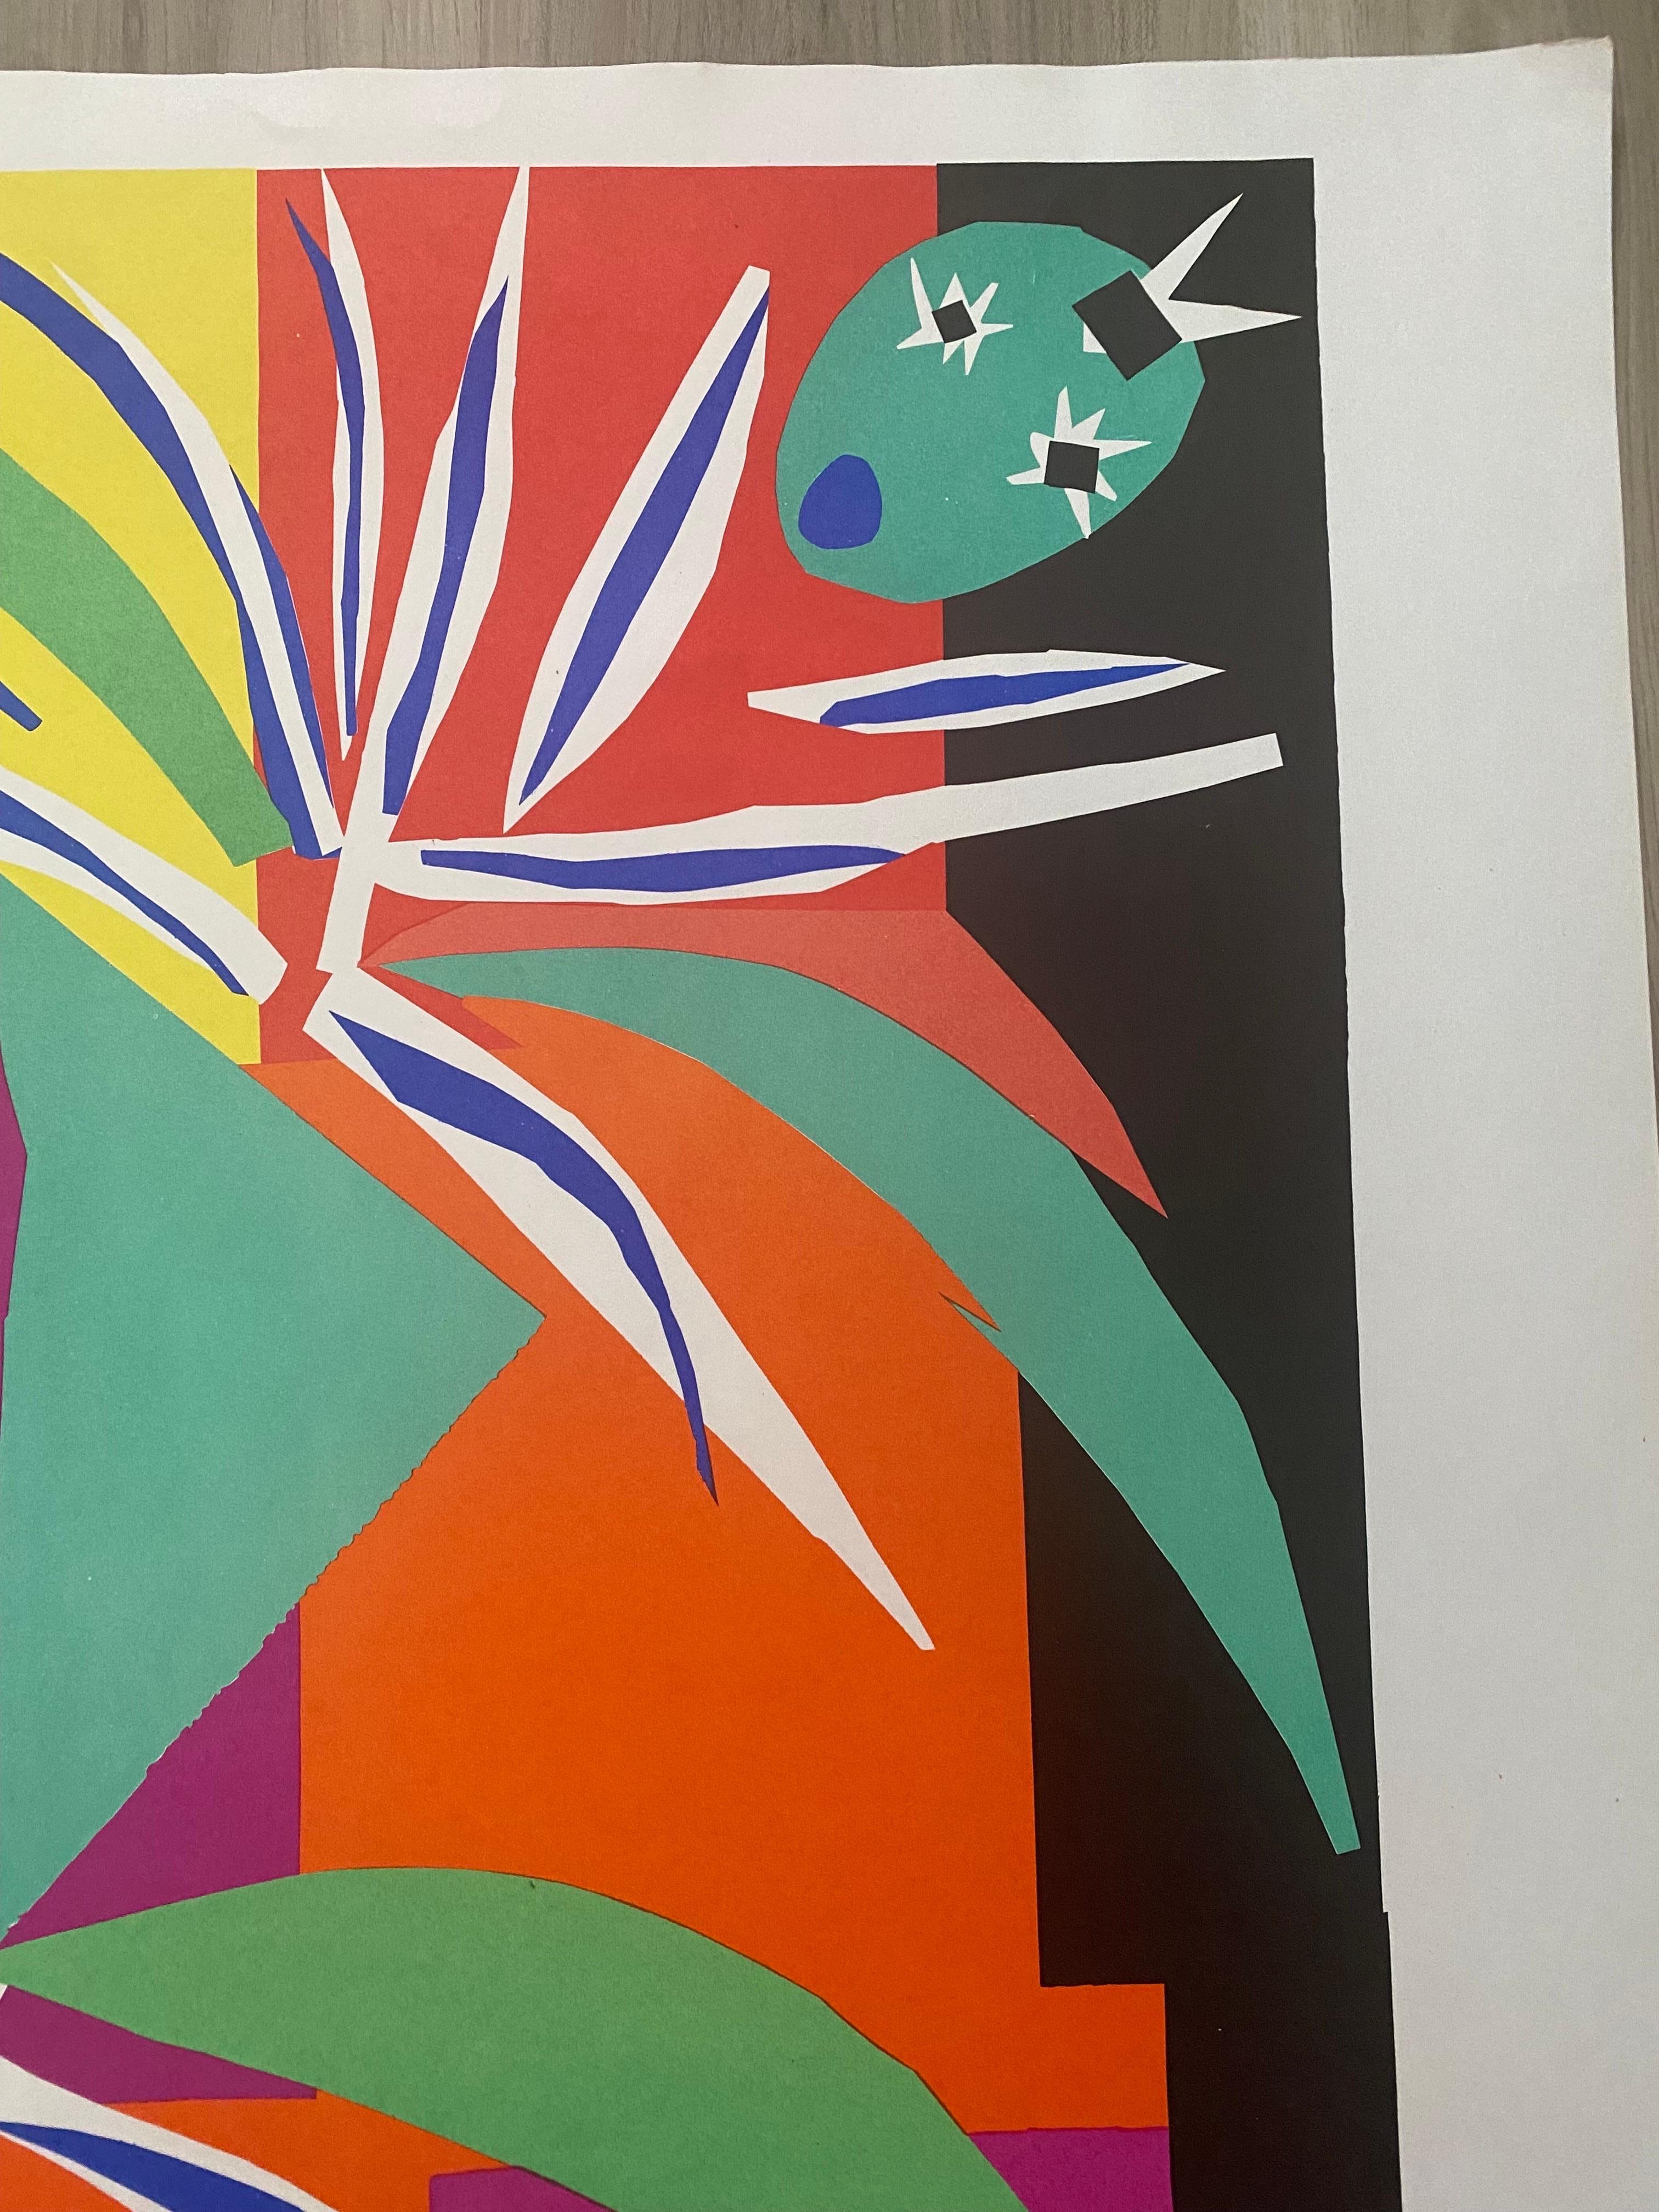 gorgeous lithograph poster of Henri Matisse's 